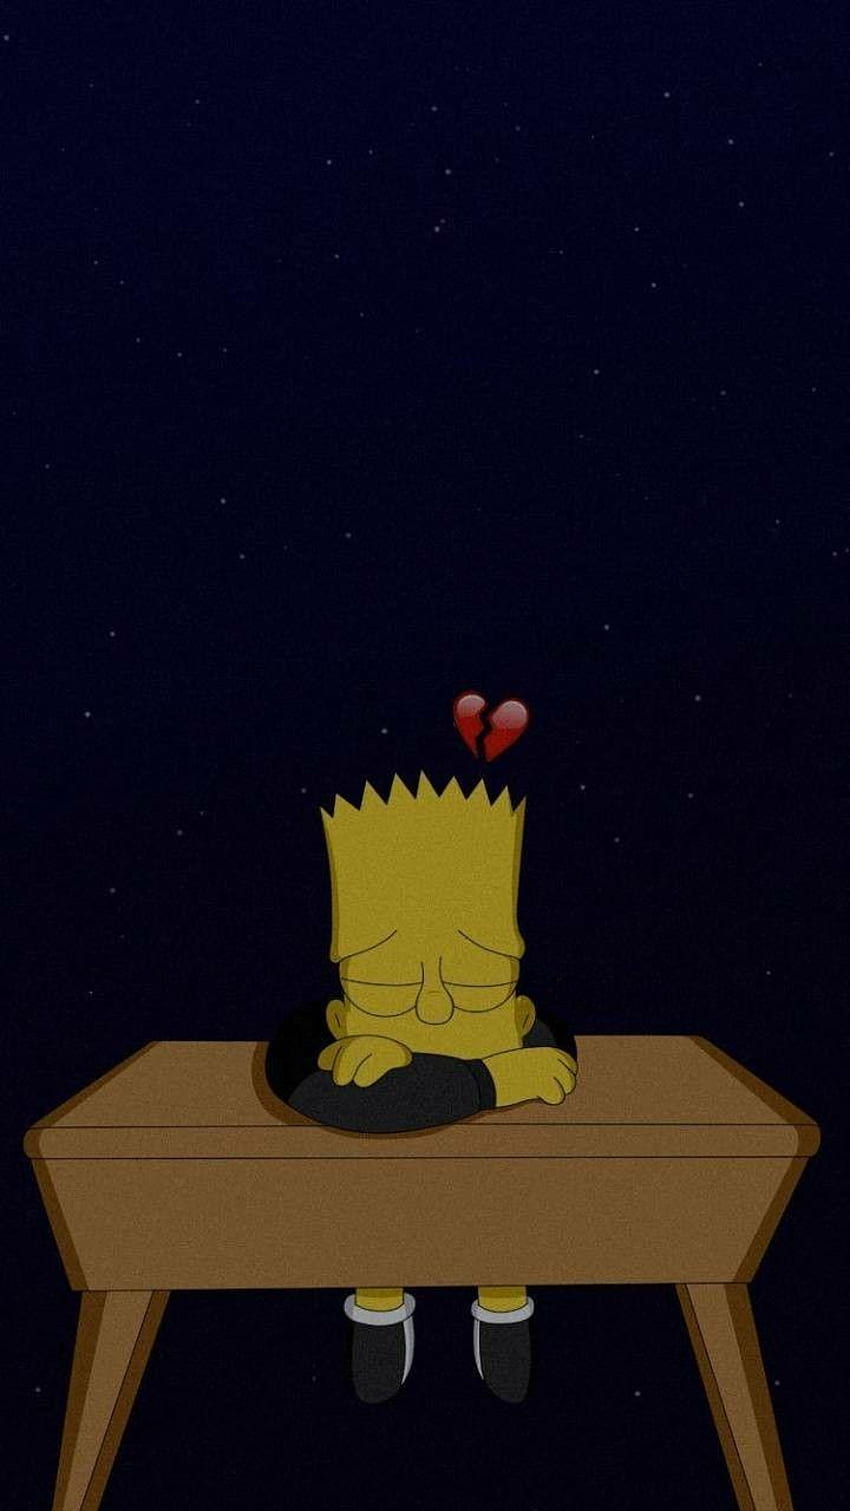 Bart Simpson sitting on a table with a heart over his head - Bart Simpson